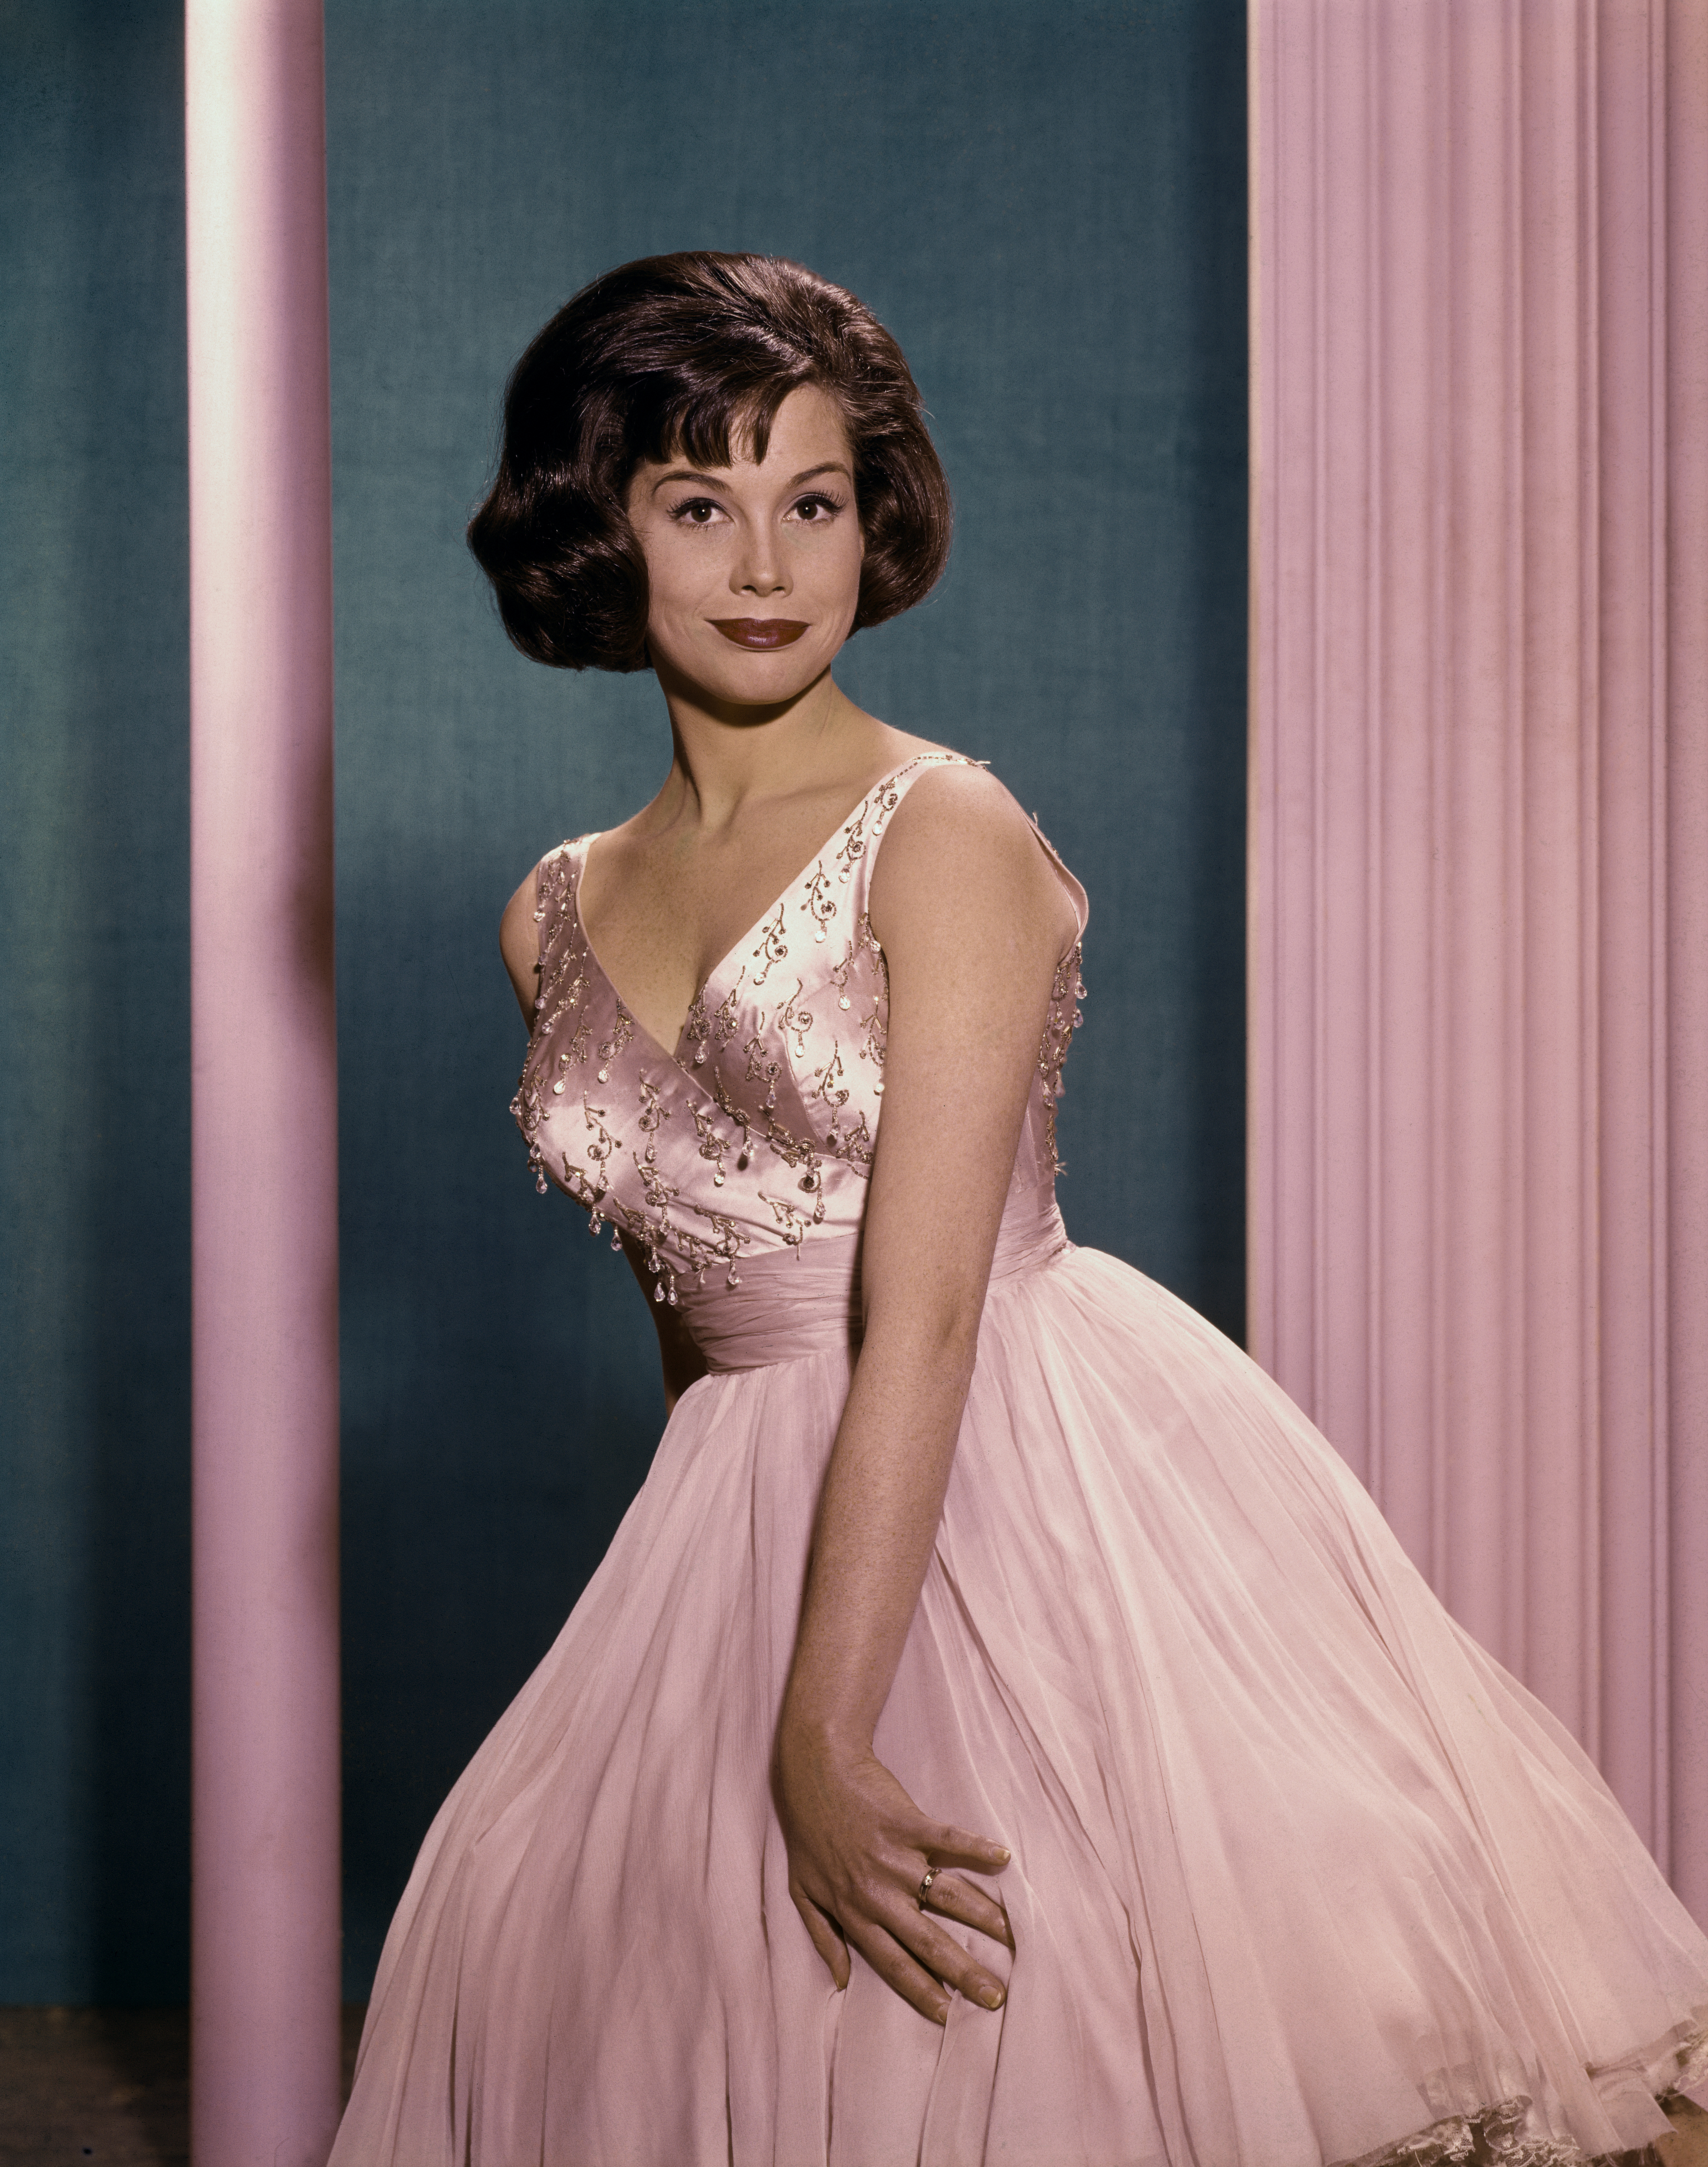 Mary Tyler Moore is pictured wearing a pink evening dress in a full-length publicity still, circa 1965. | Source: Getty Images